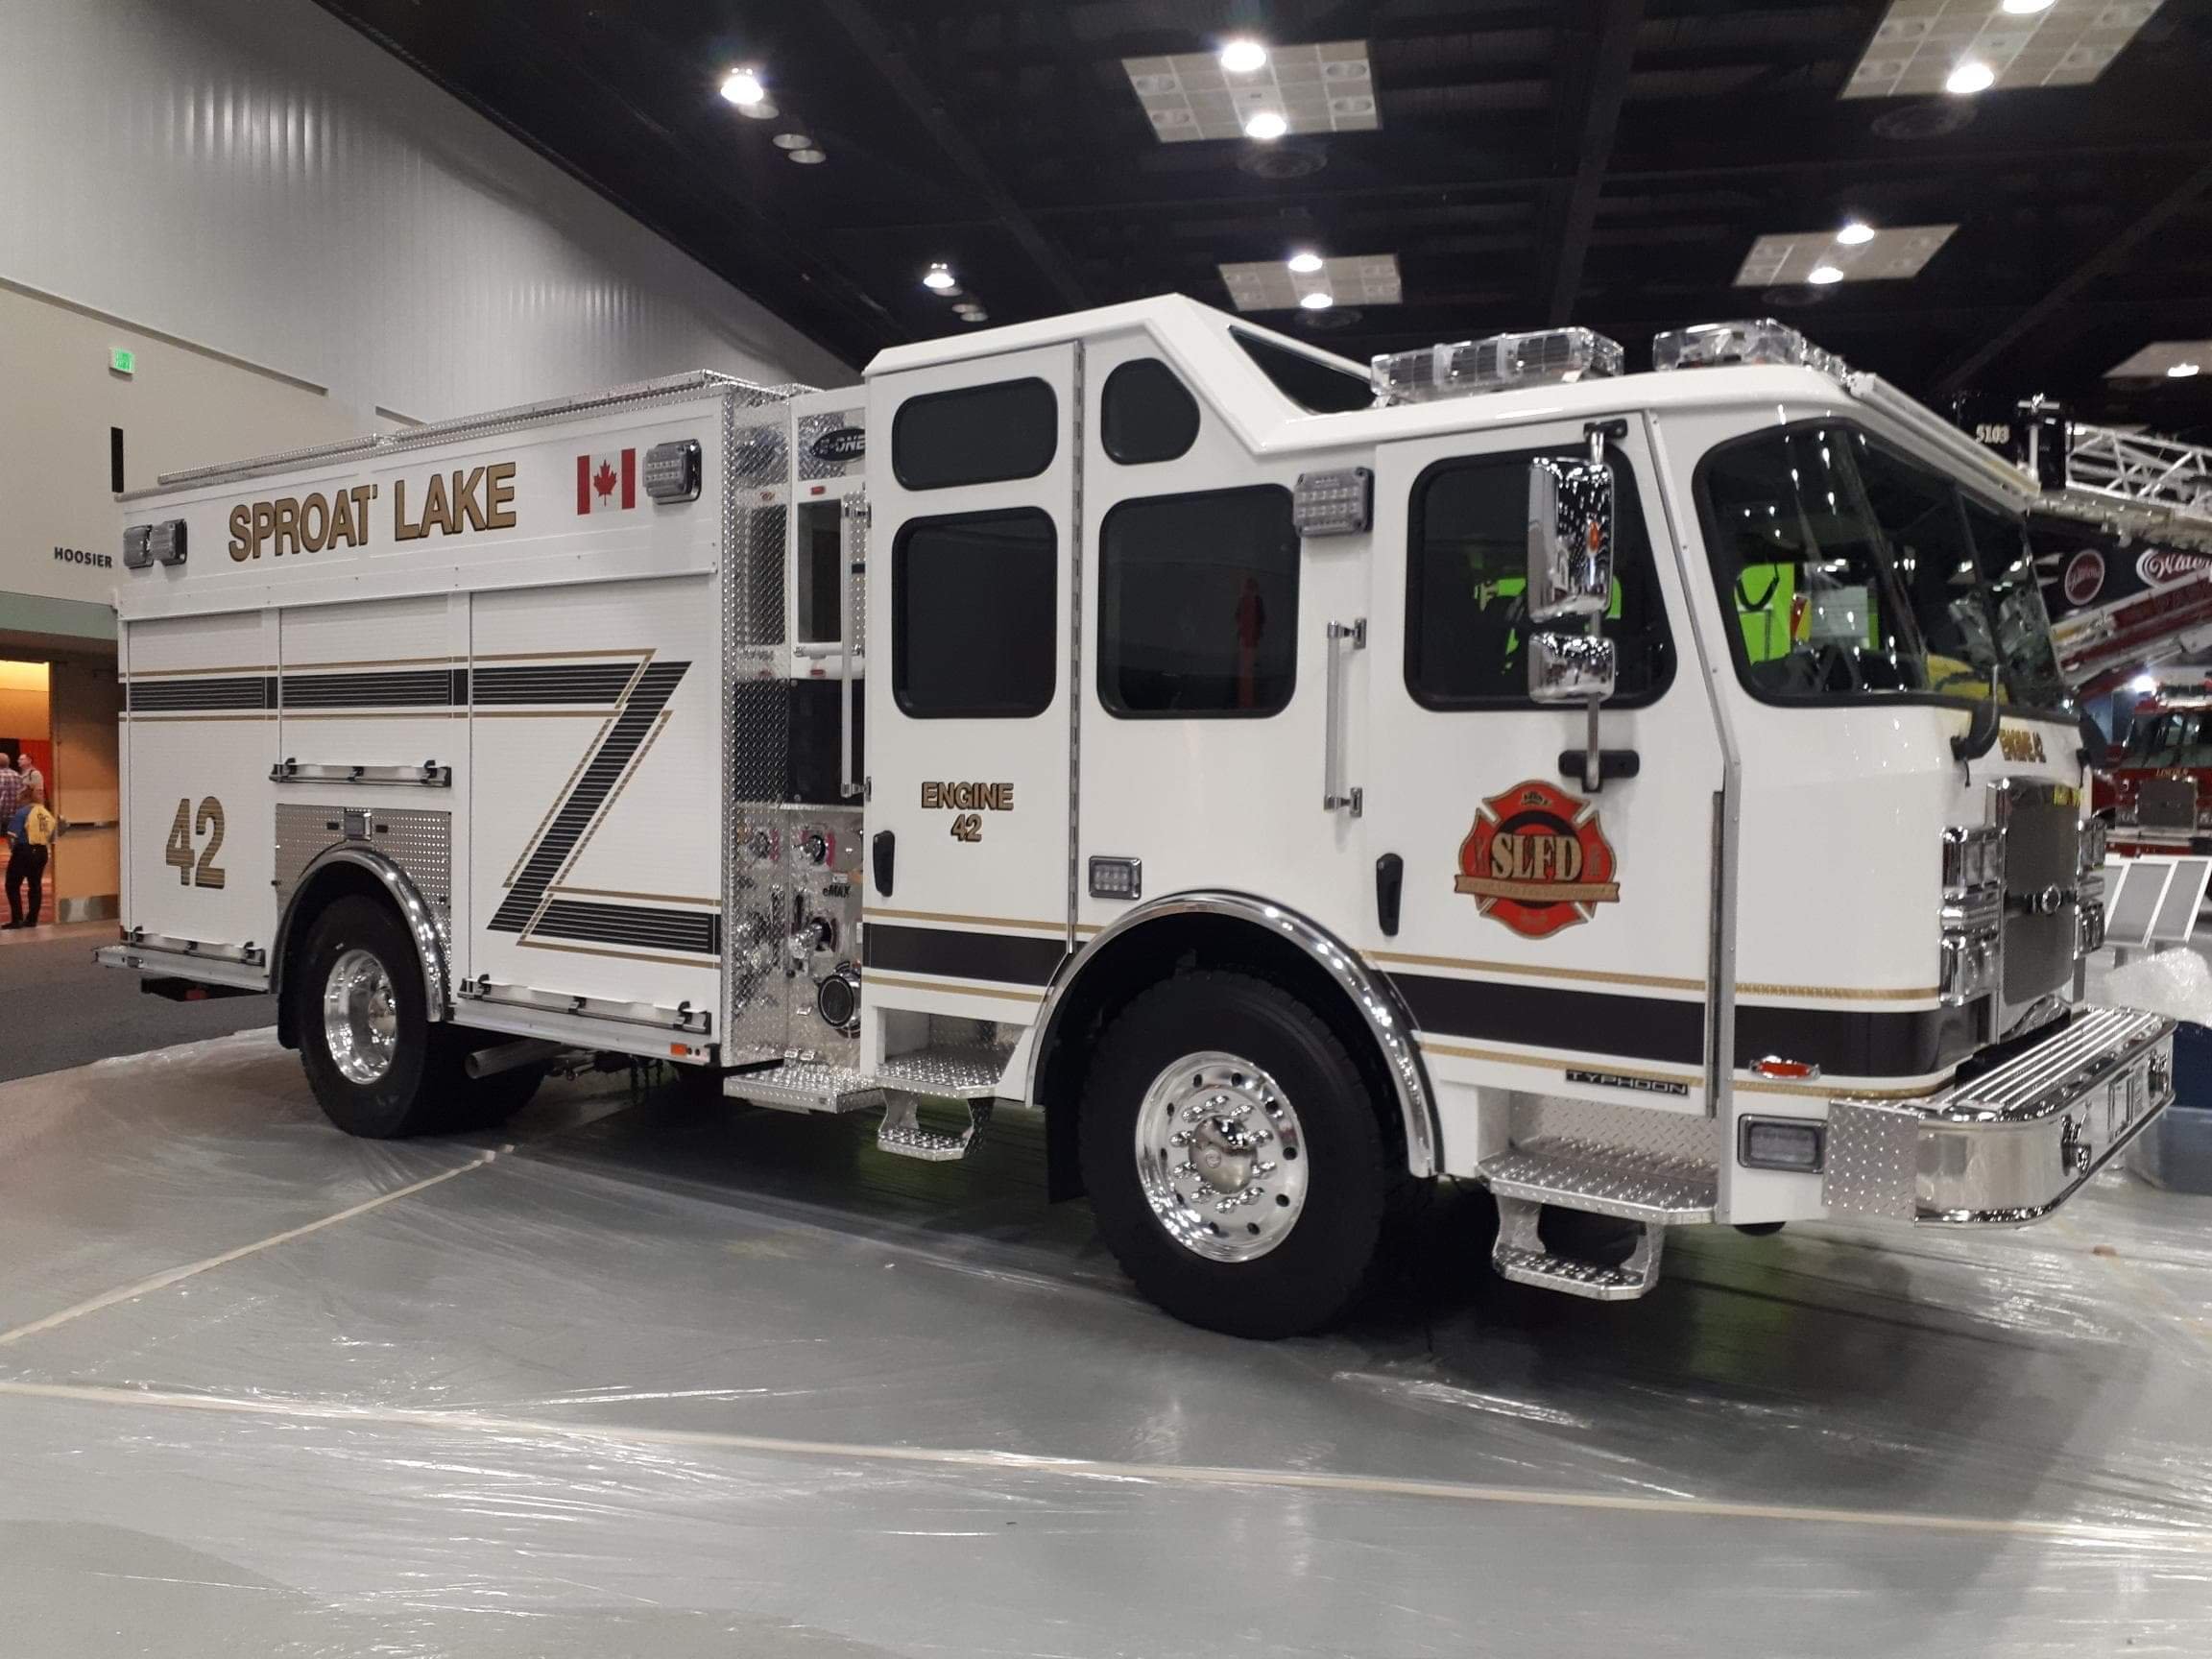 Sproat Lake Volunteer Fire Department provides fire and first responder services to the citizens of Sproat Lake, and has done so for over 50 years.